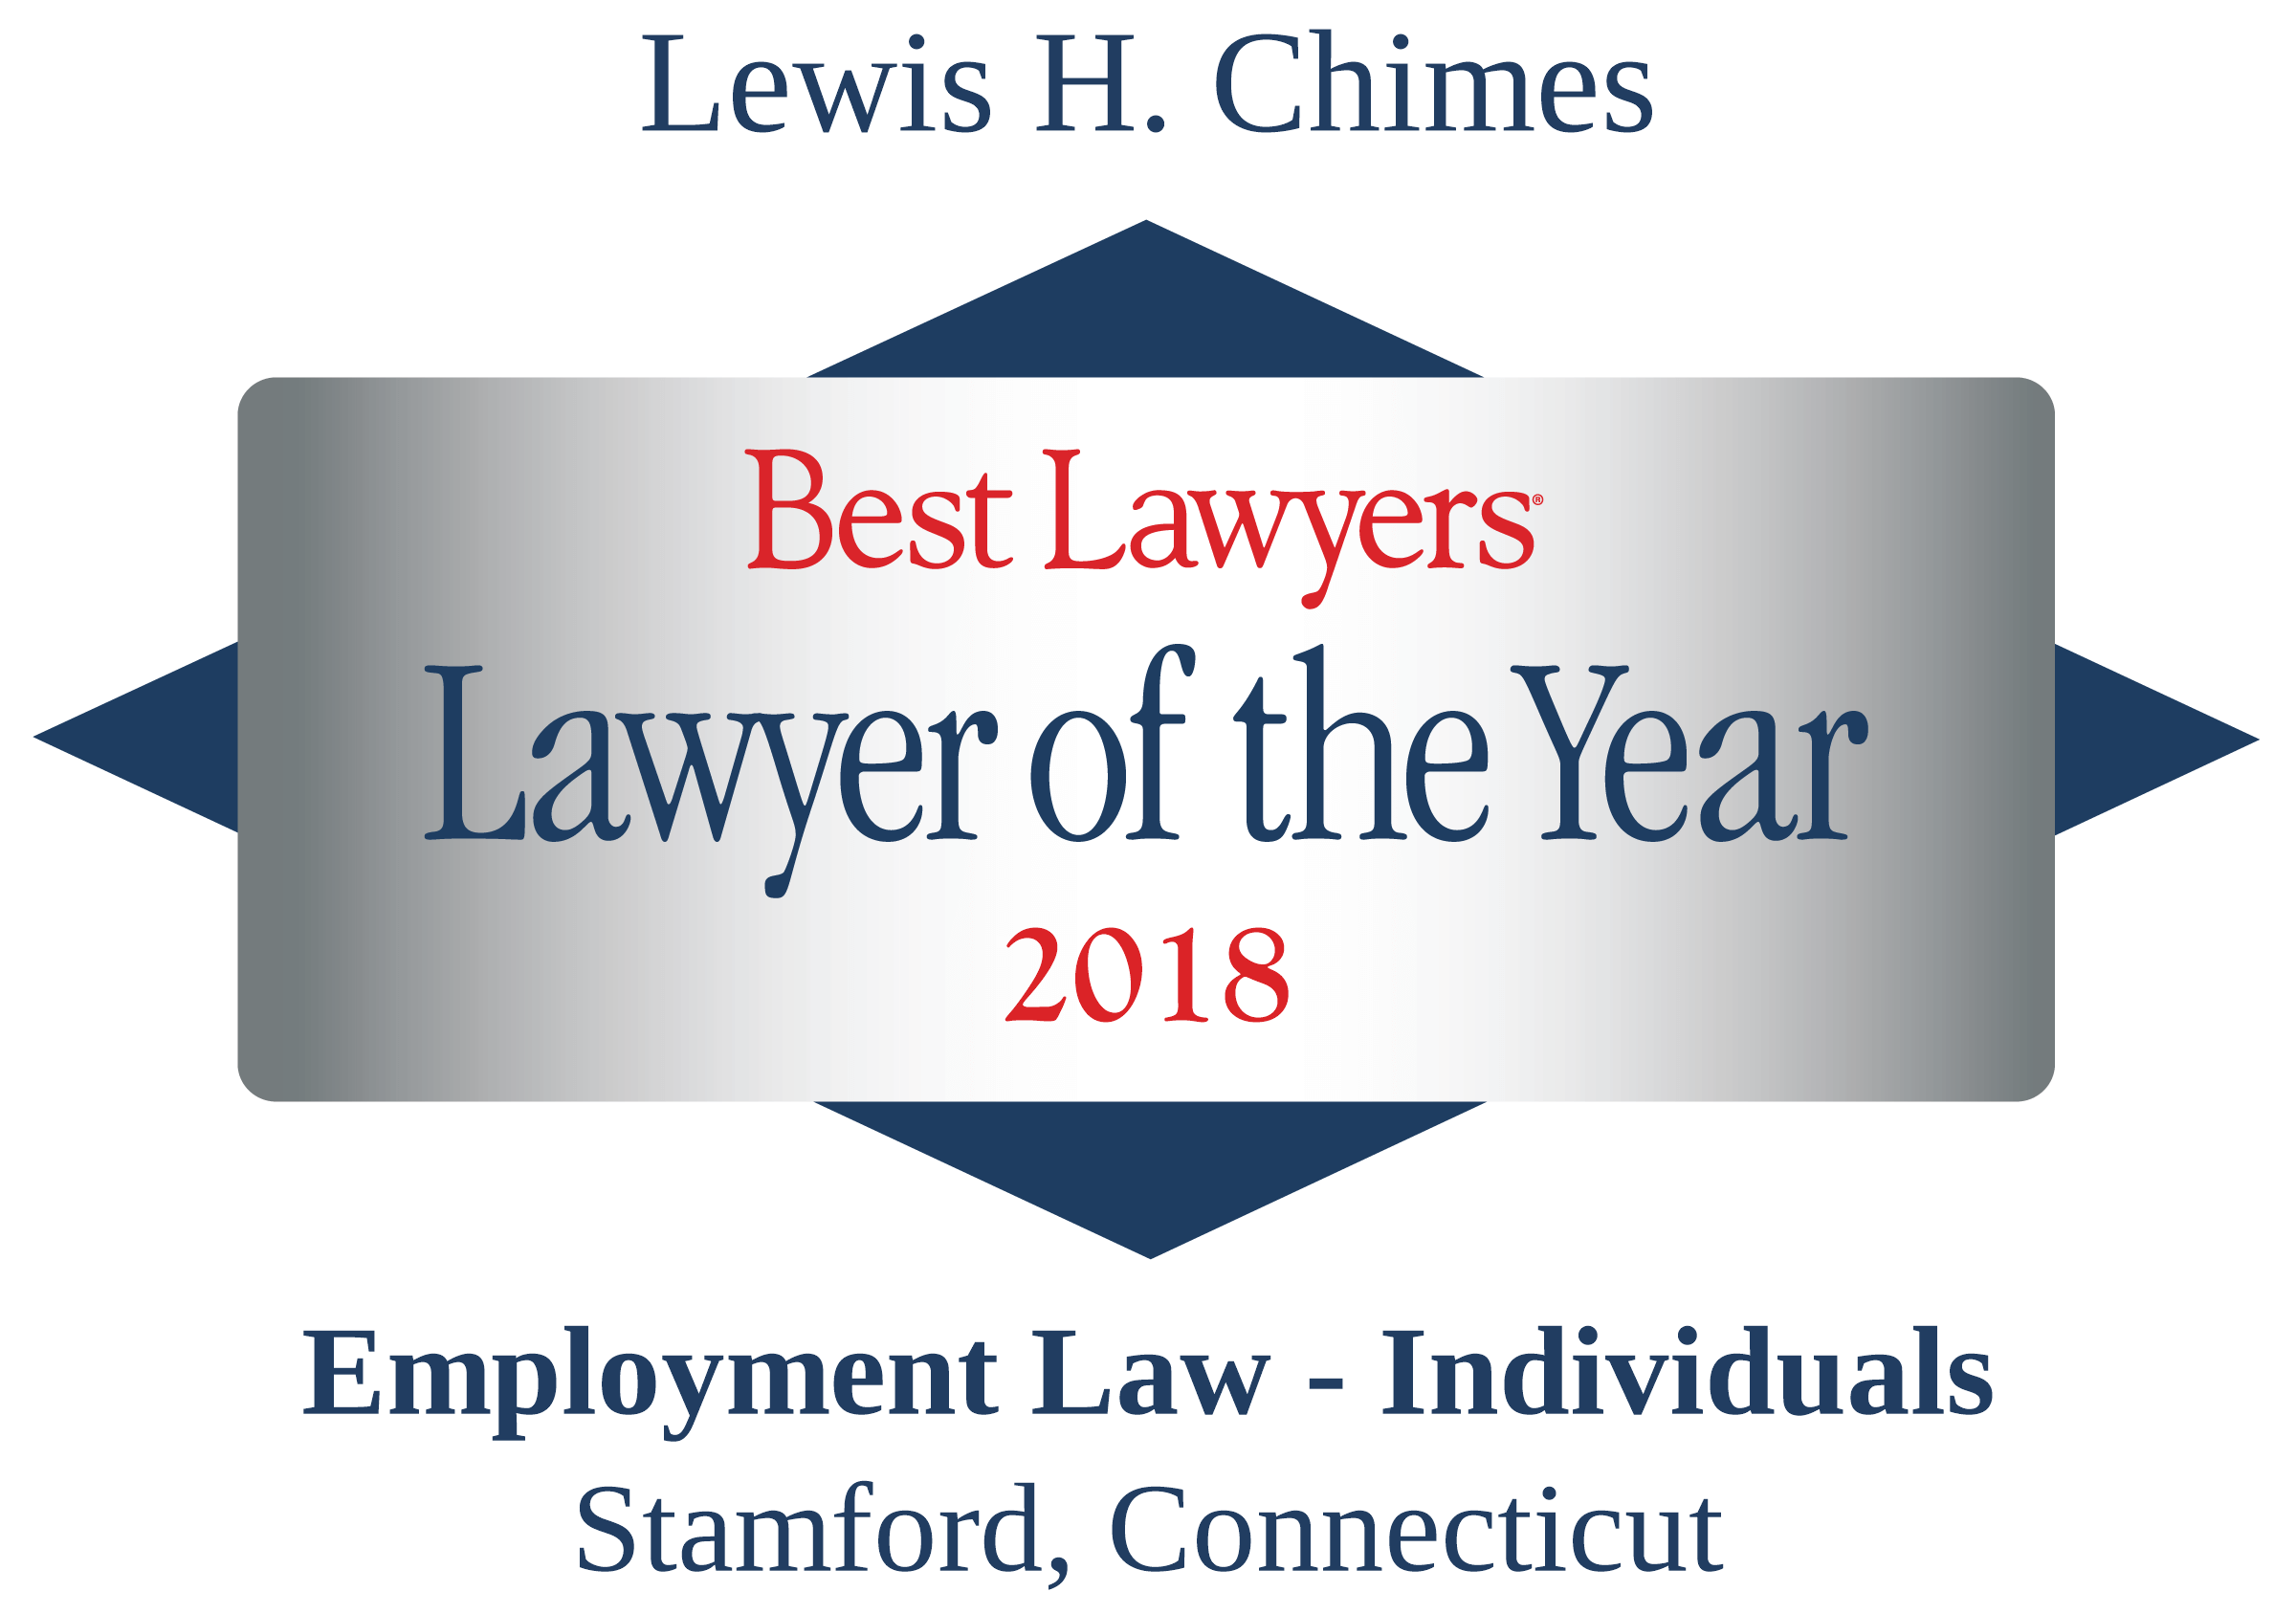 Lewis H. Chimes Best Lawyers Lawyer of the Year 2018 Employment Law - Individuals Stamford, Connecticut